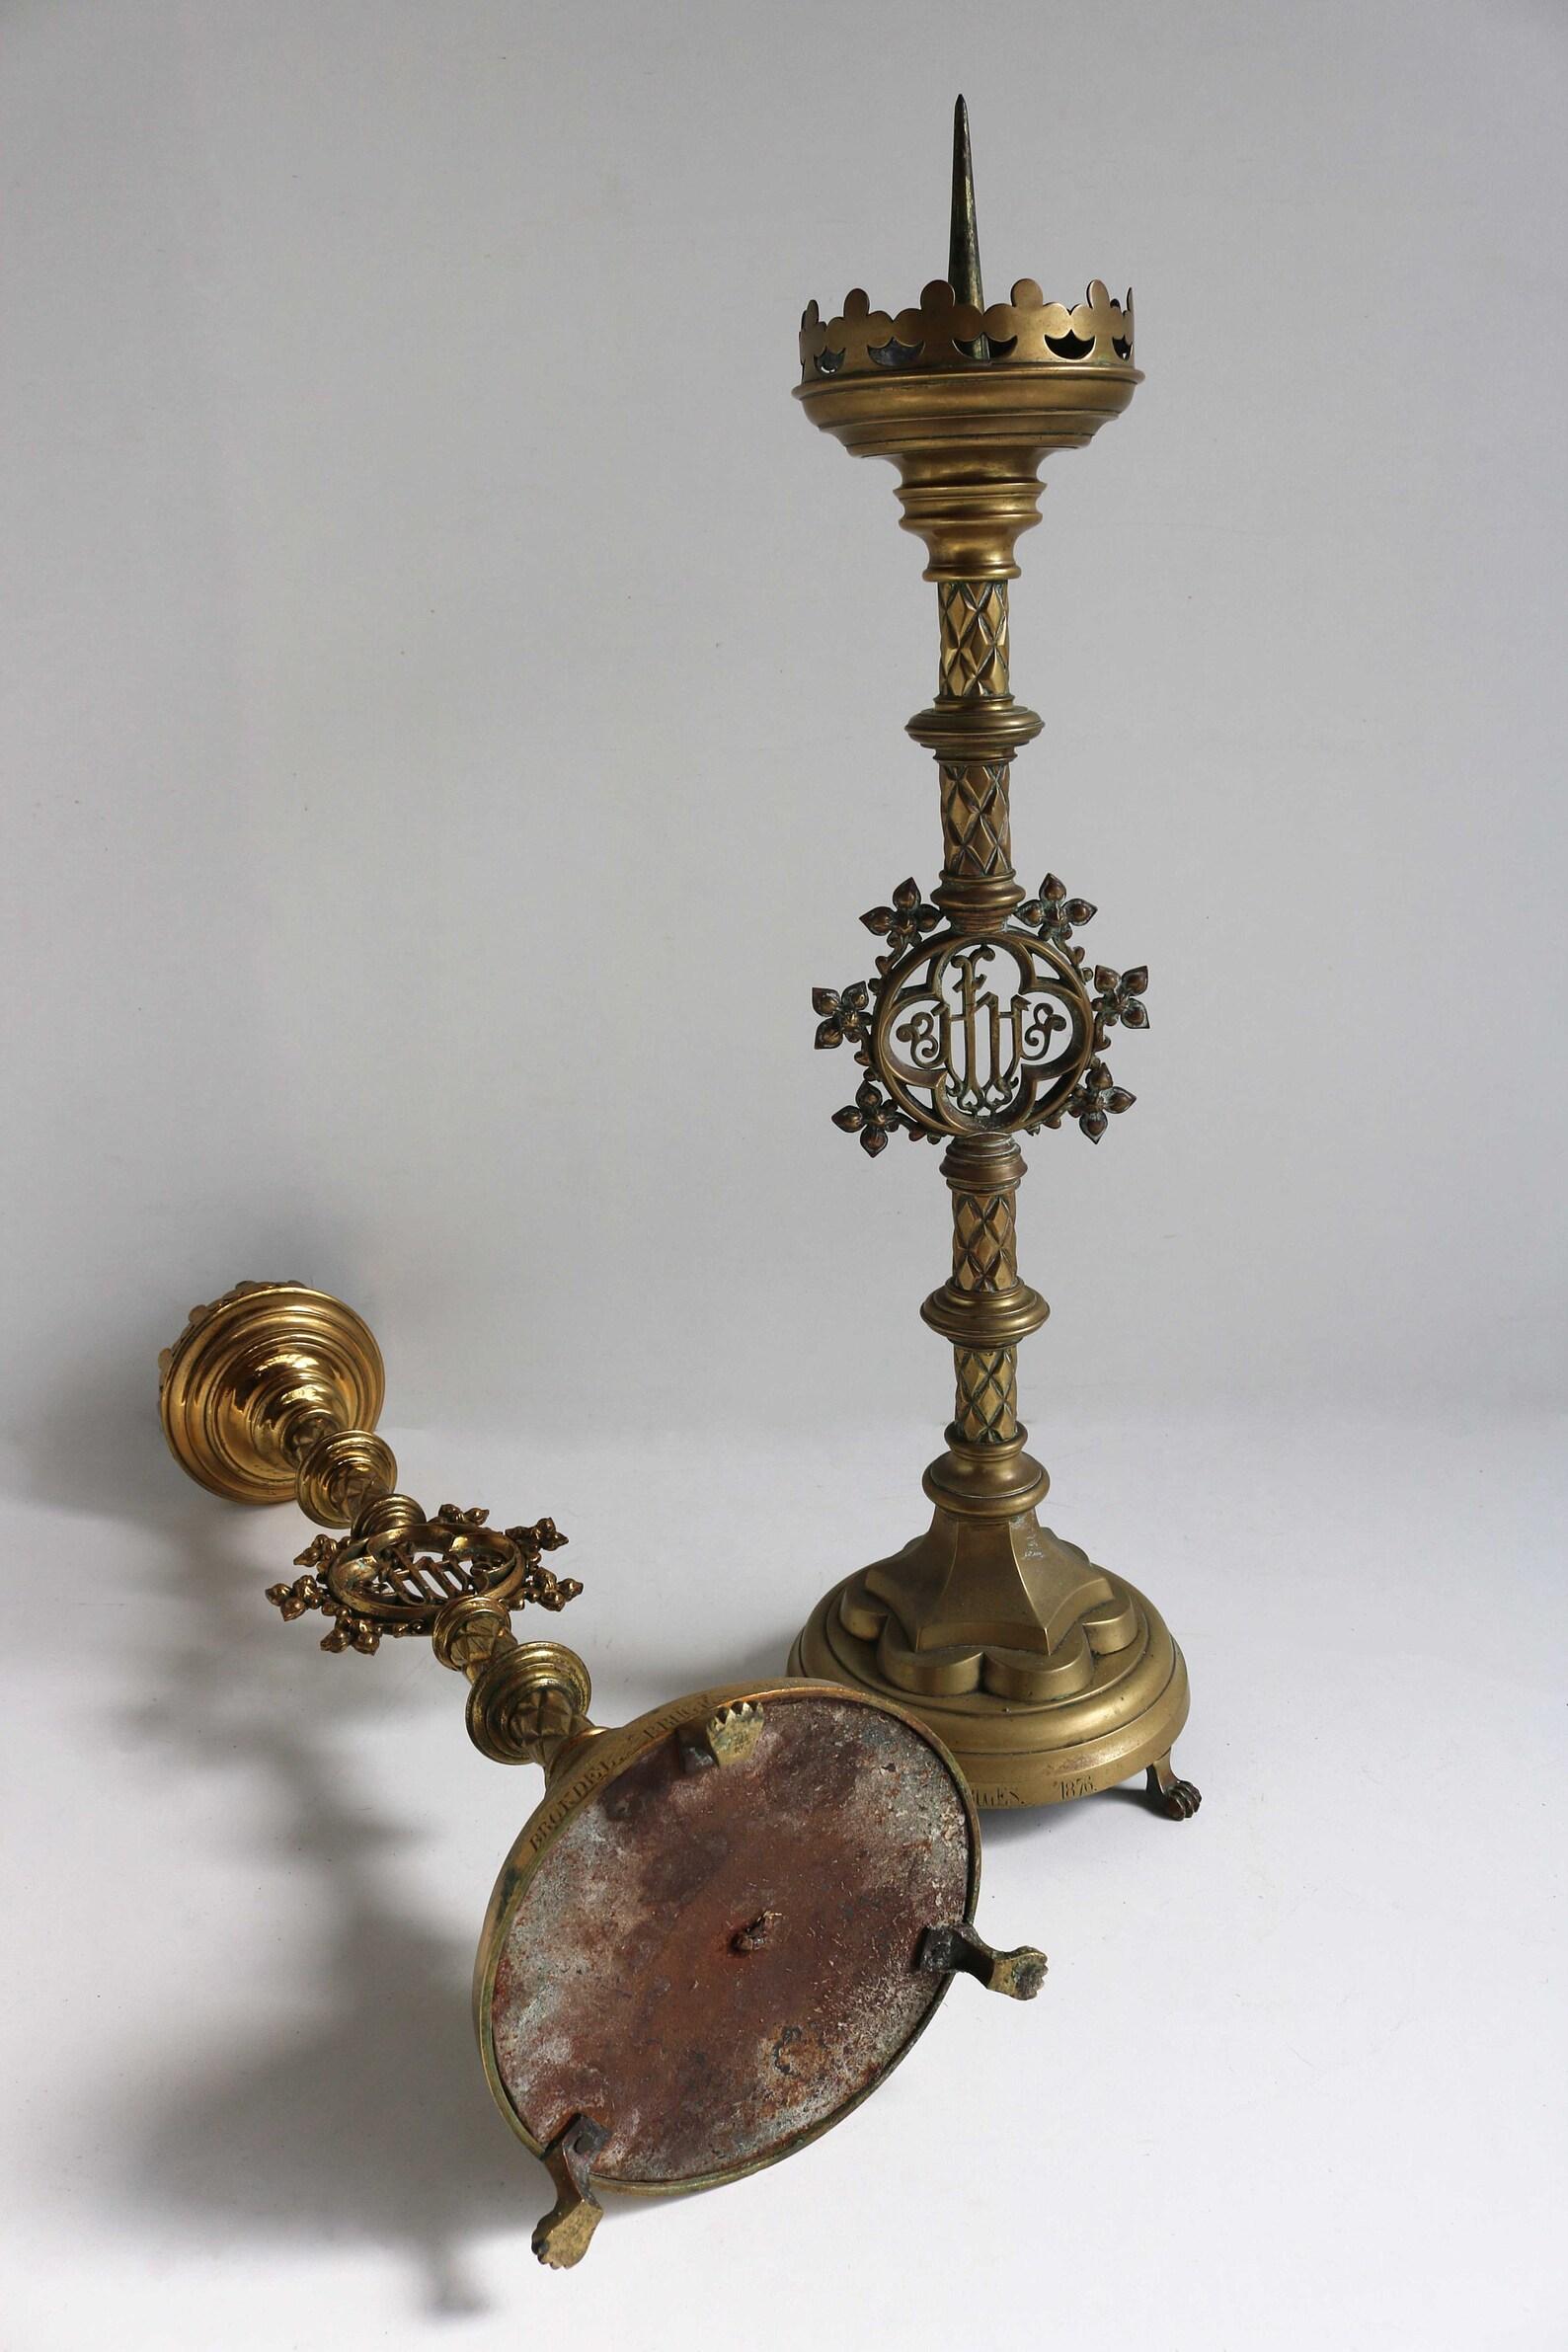 Gothic Revival Pair of Antique Brass Candlesticks 1876 Church Altar Religious Candleholders